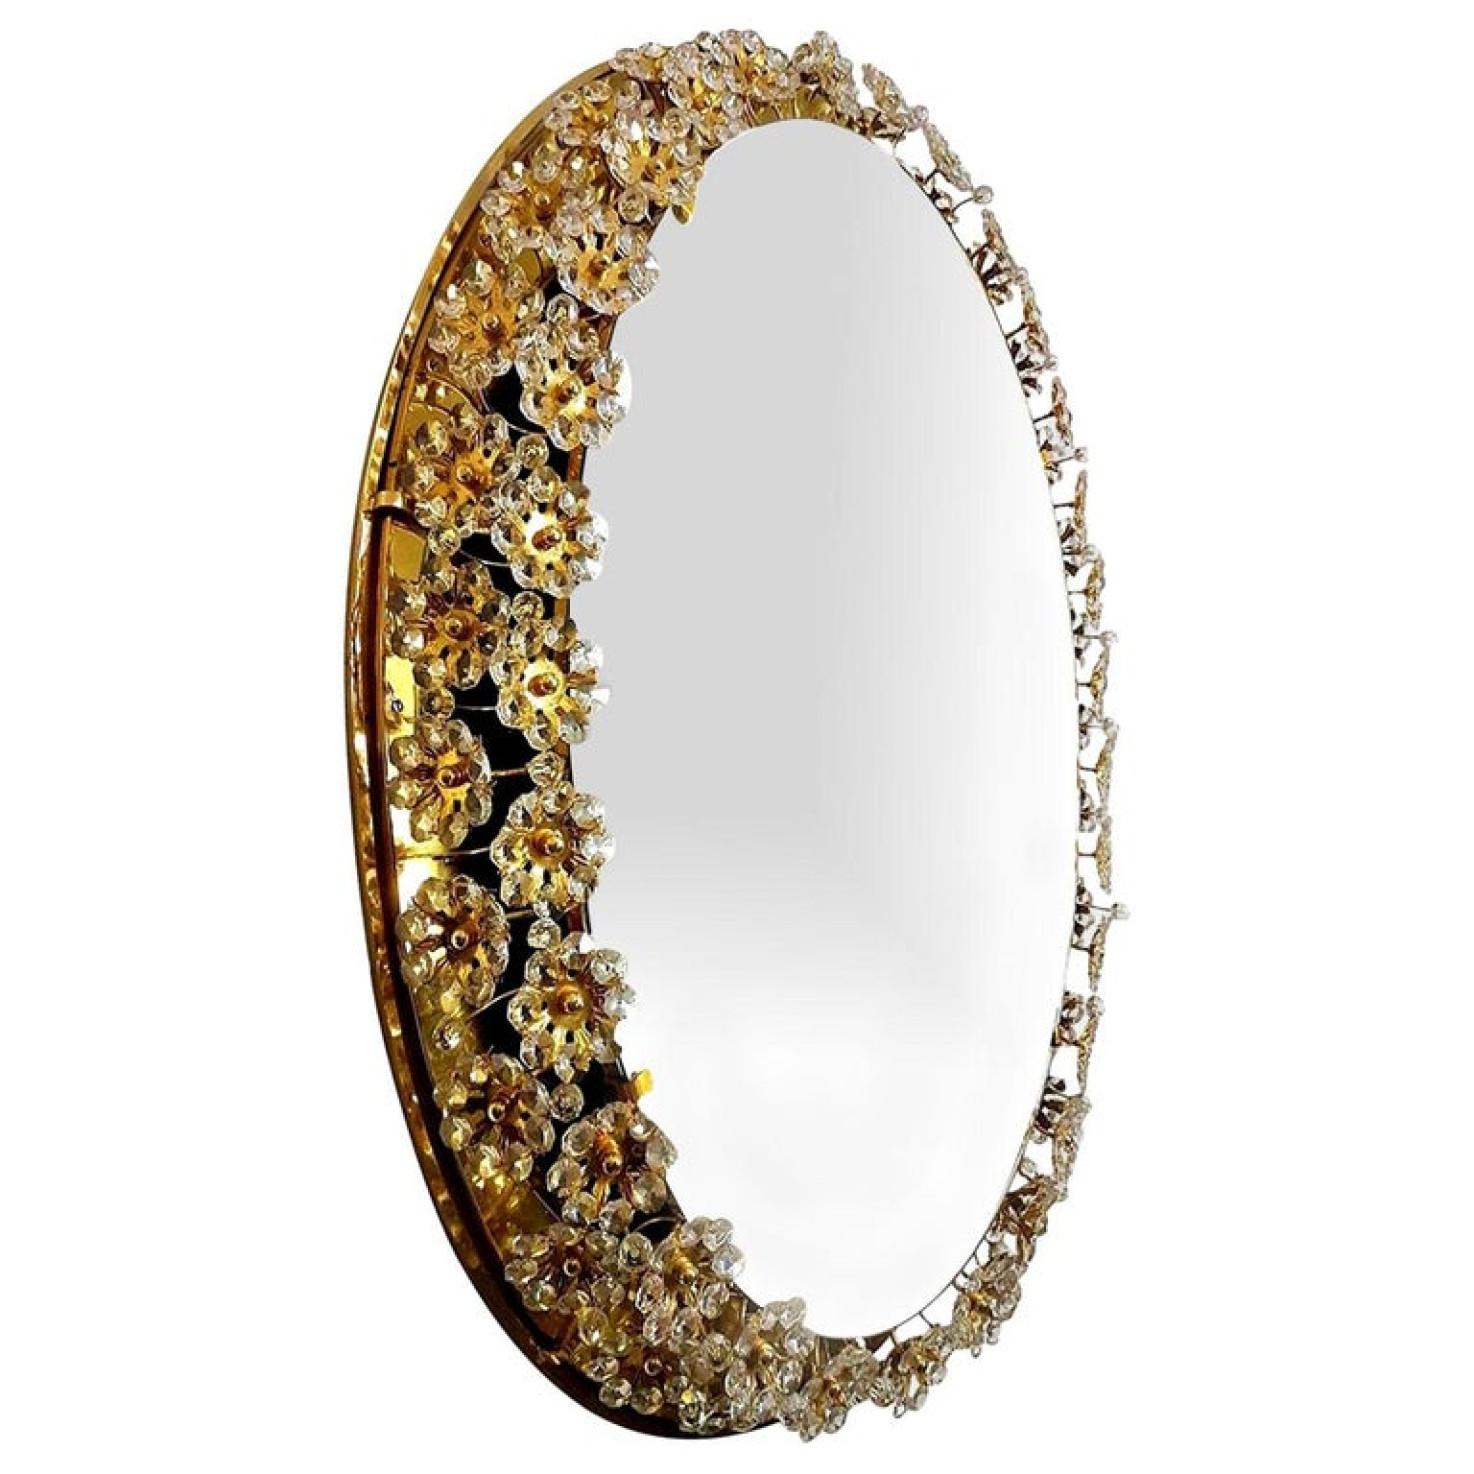 A gorgeous gilded oval floral illuminated wall mirror, manufactured in the 1970s by Palwa. Handcrafted frame, made of gold-plated brass, covered with jewel like faceted crystal glass petals.

Cleaned, well wired and ready to use. In very good